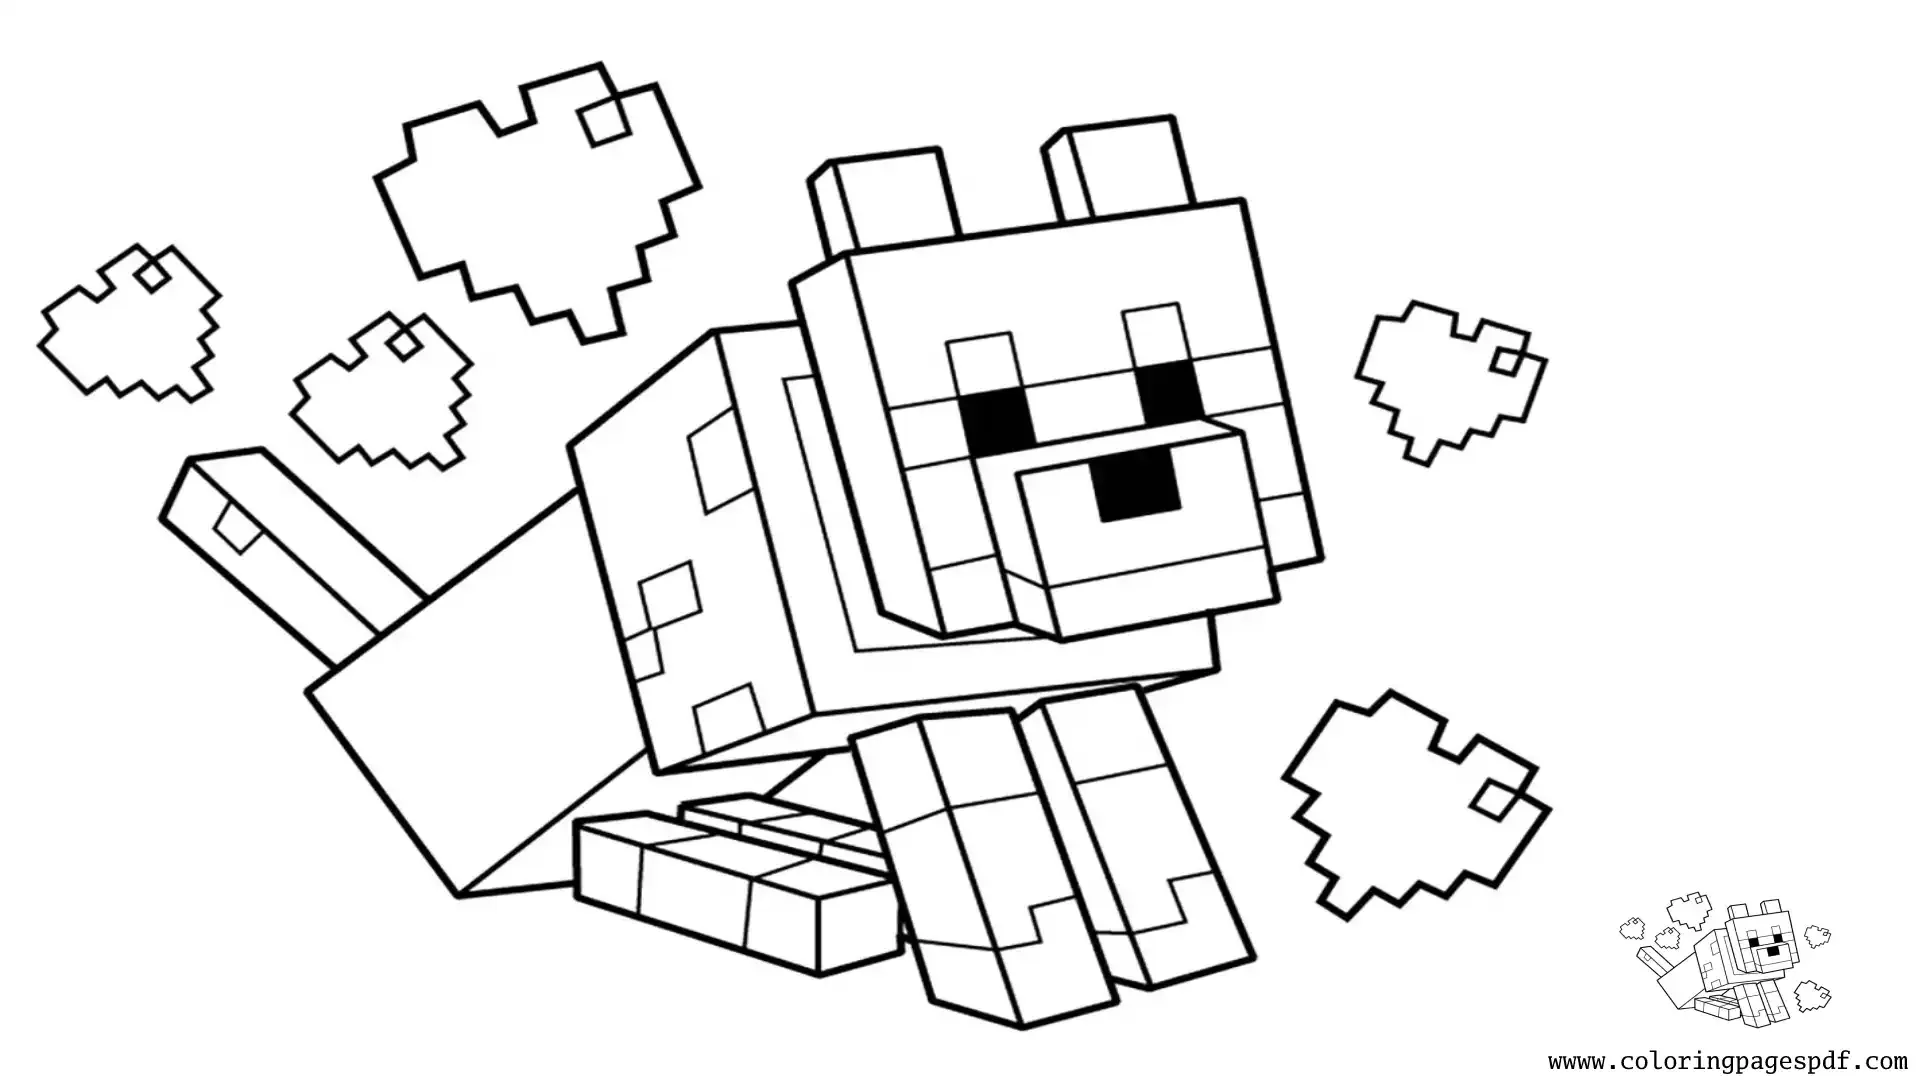 Coloring Page Of A Lovely Minecraft Dog